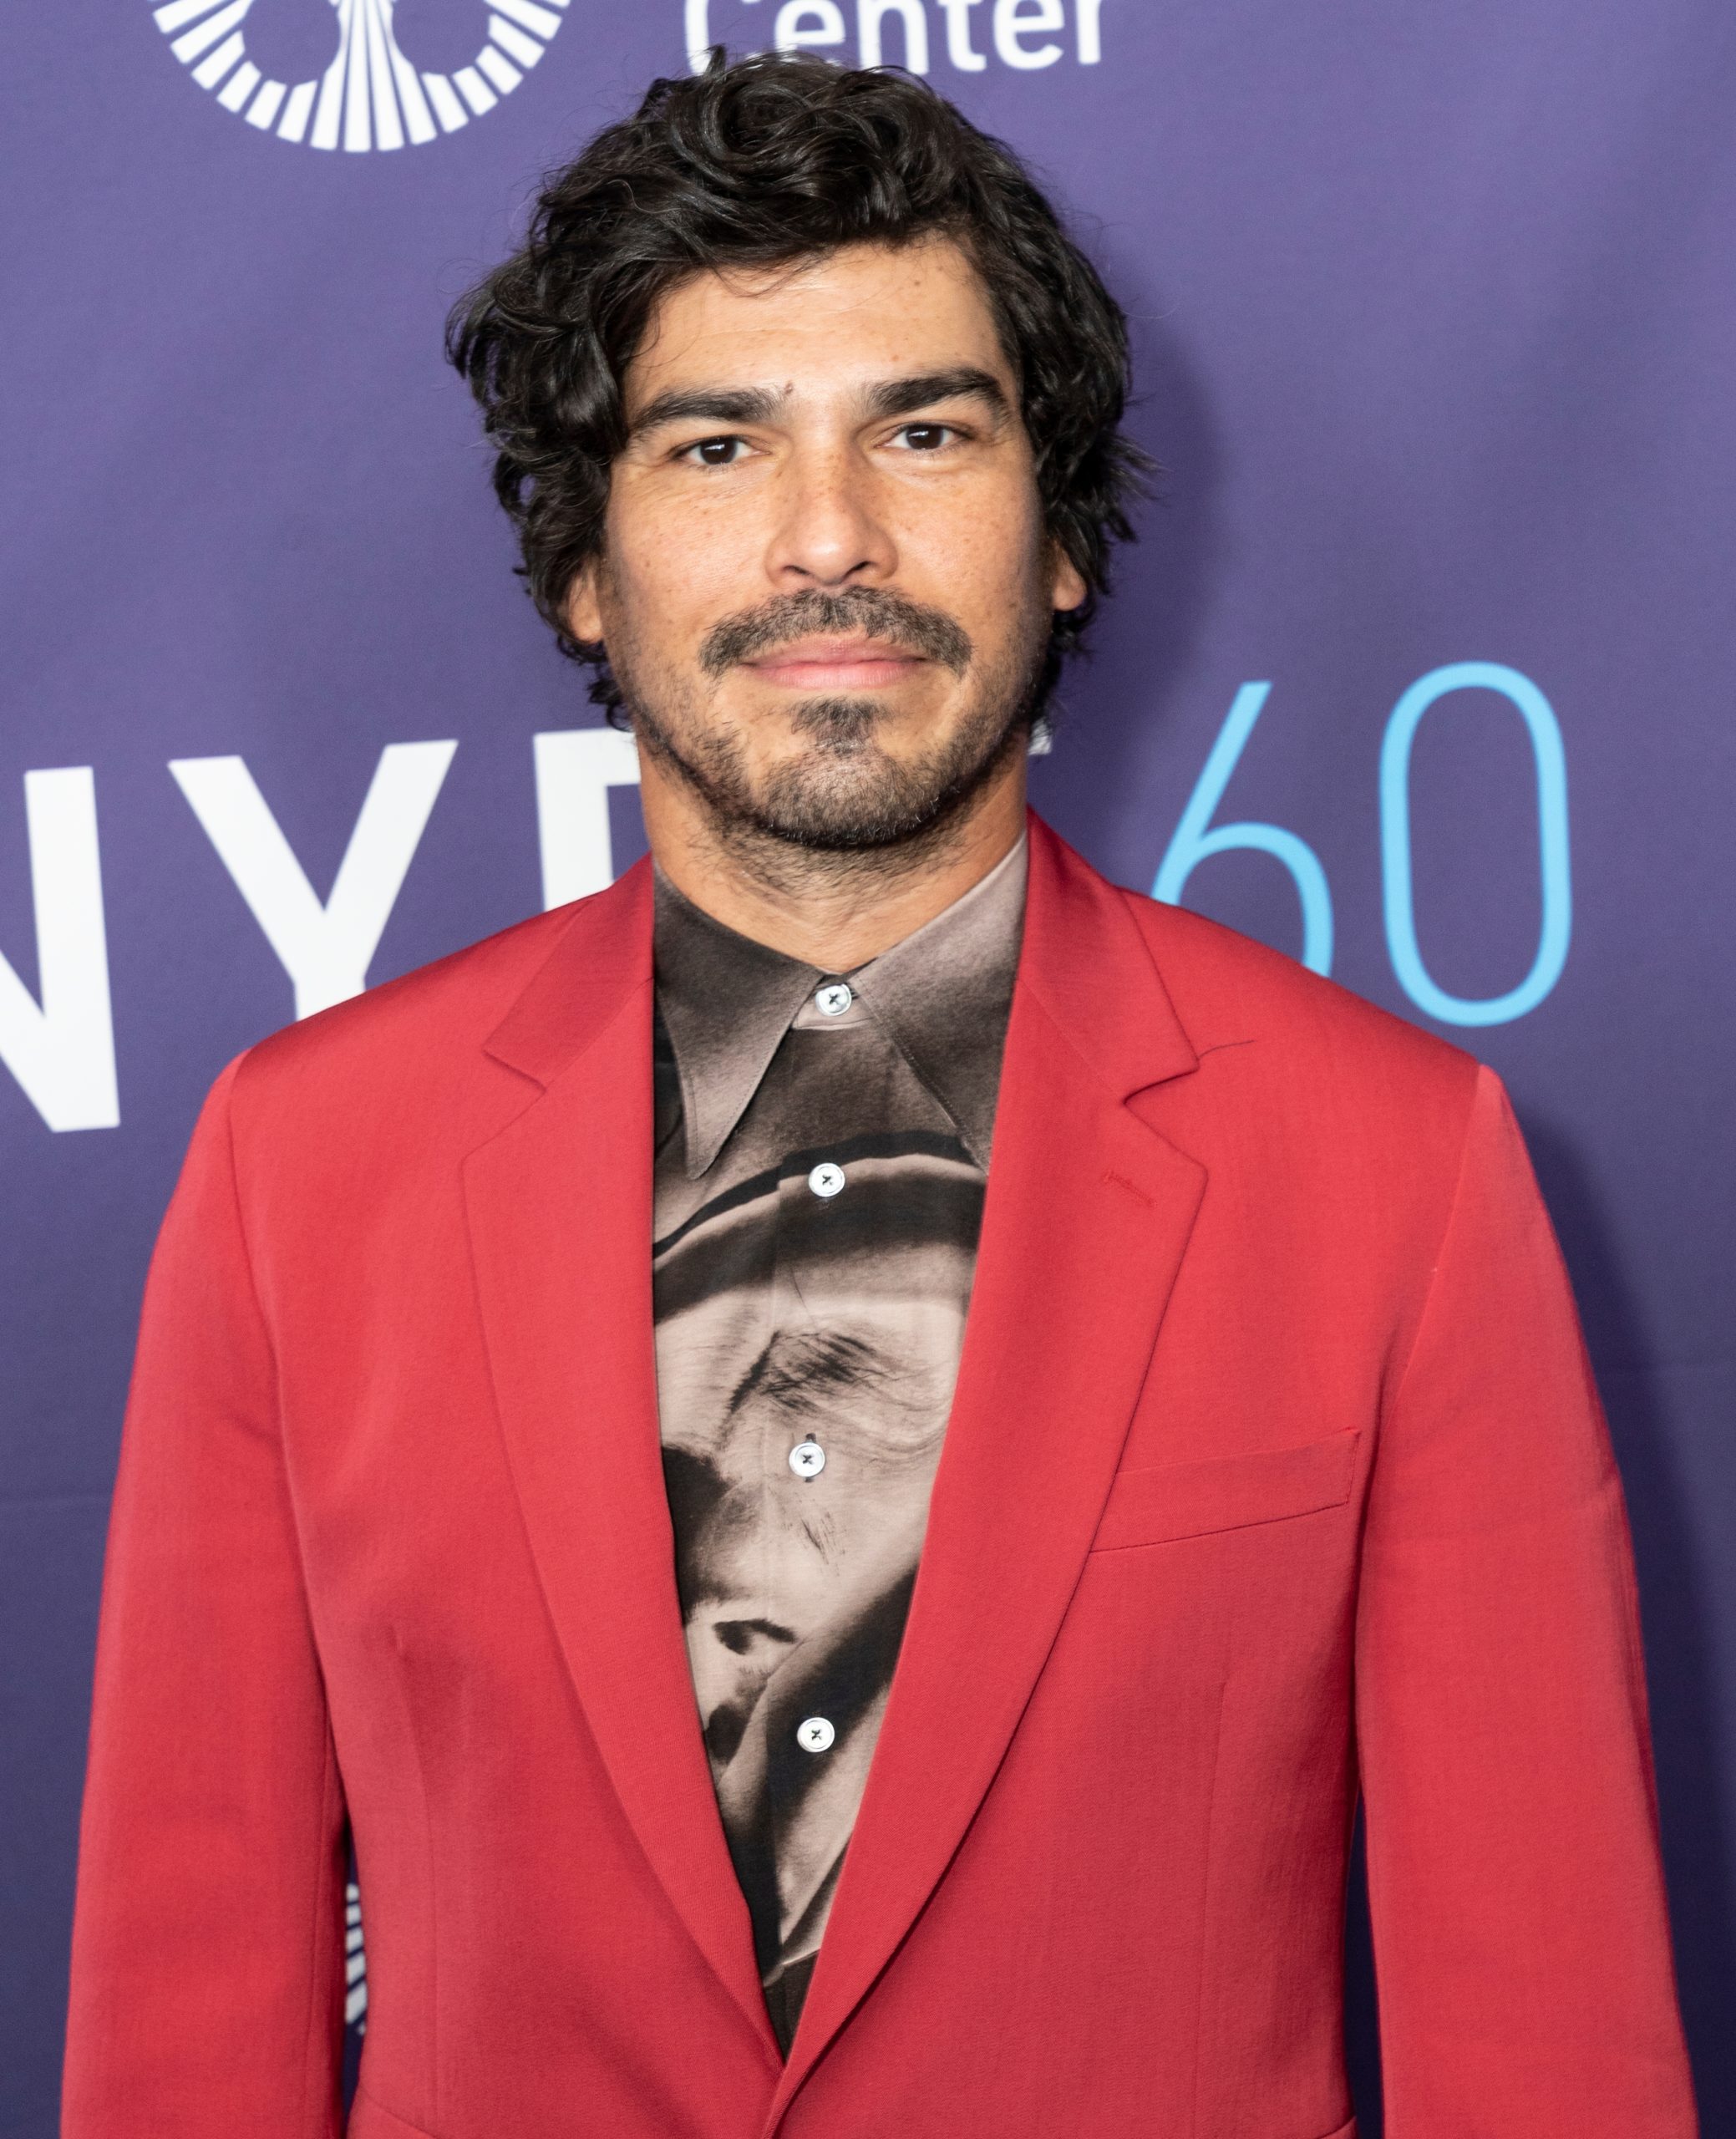 Raul Castillo, a Latino man with dark hair, slight beard and mustache, smiles, wearing a red suit jacket over a brown silk shirt.